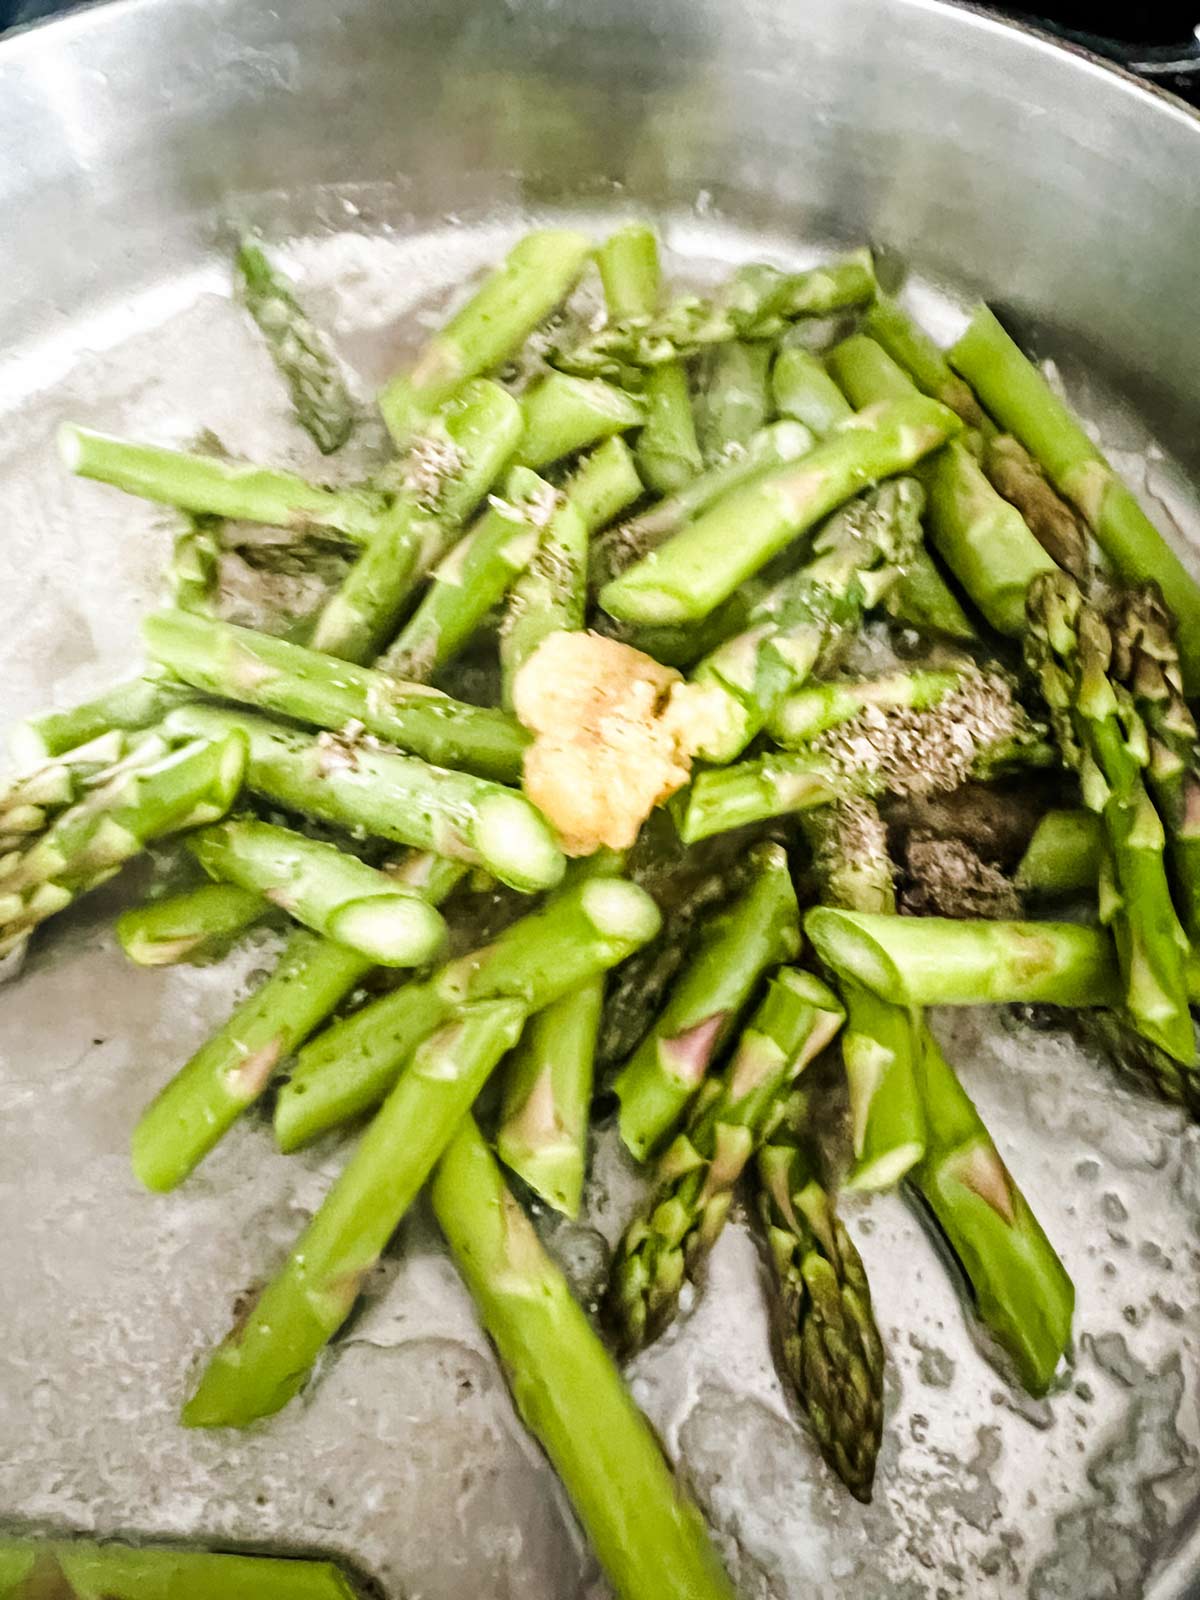 Asparagus, garlic, and butter that have just been added to a skillet.